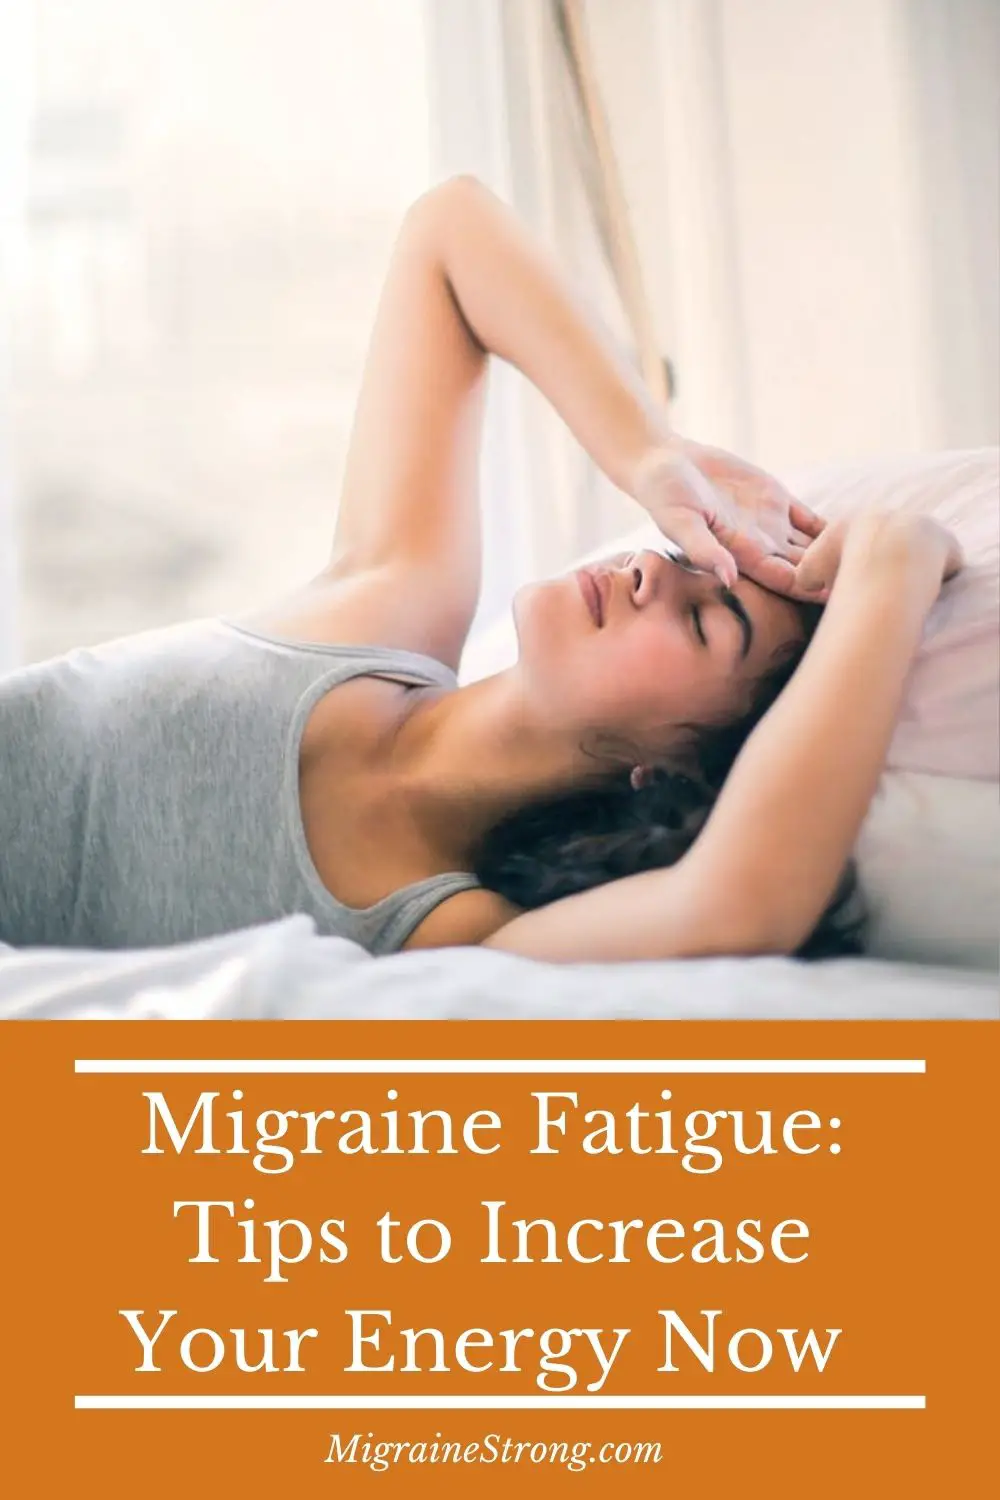 Migraine and Fatigue: Tips to Increase Energy Now